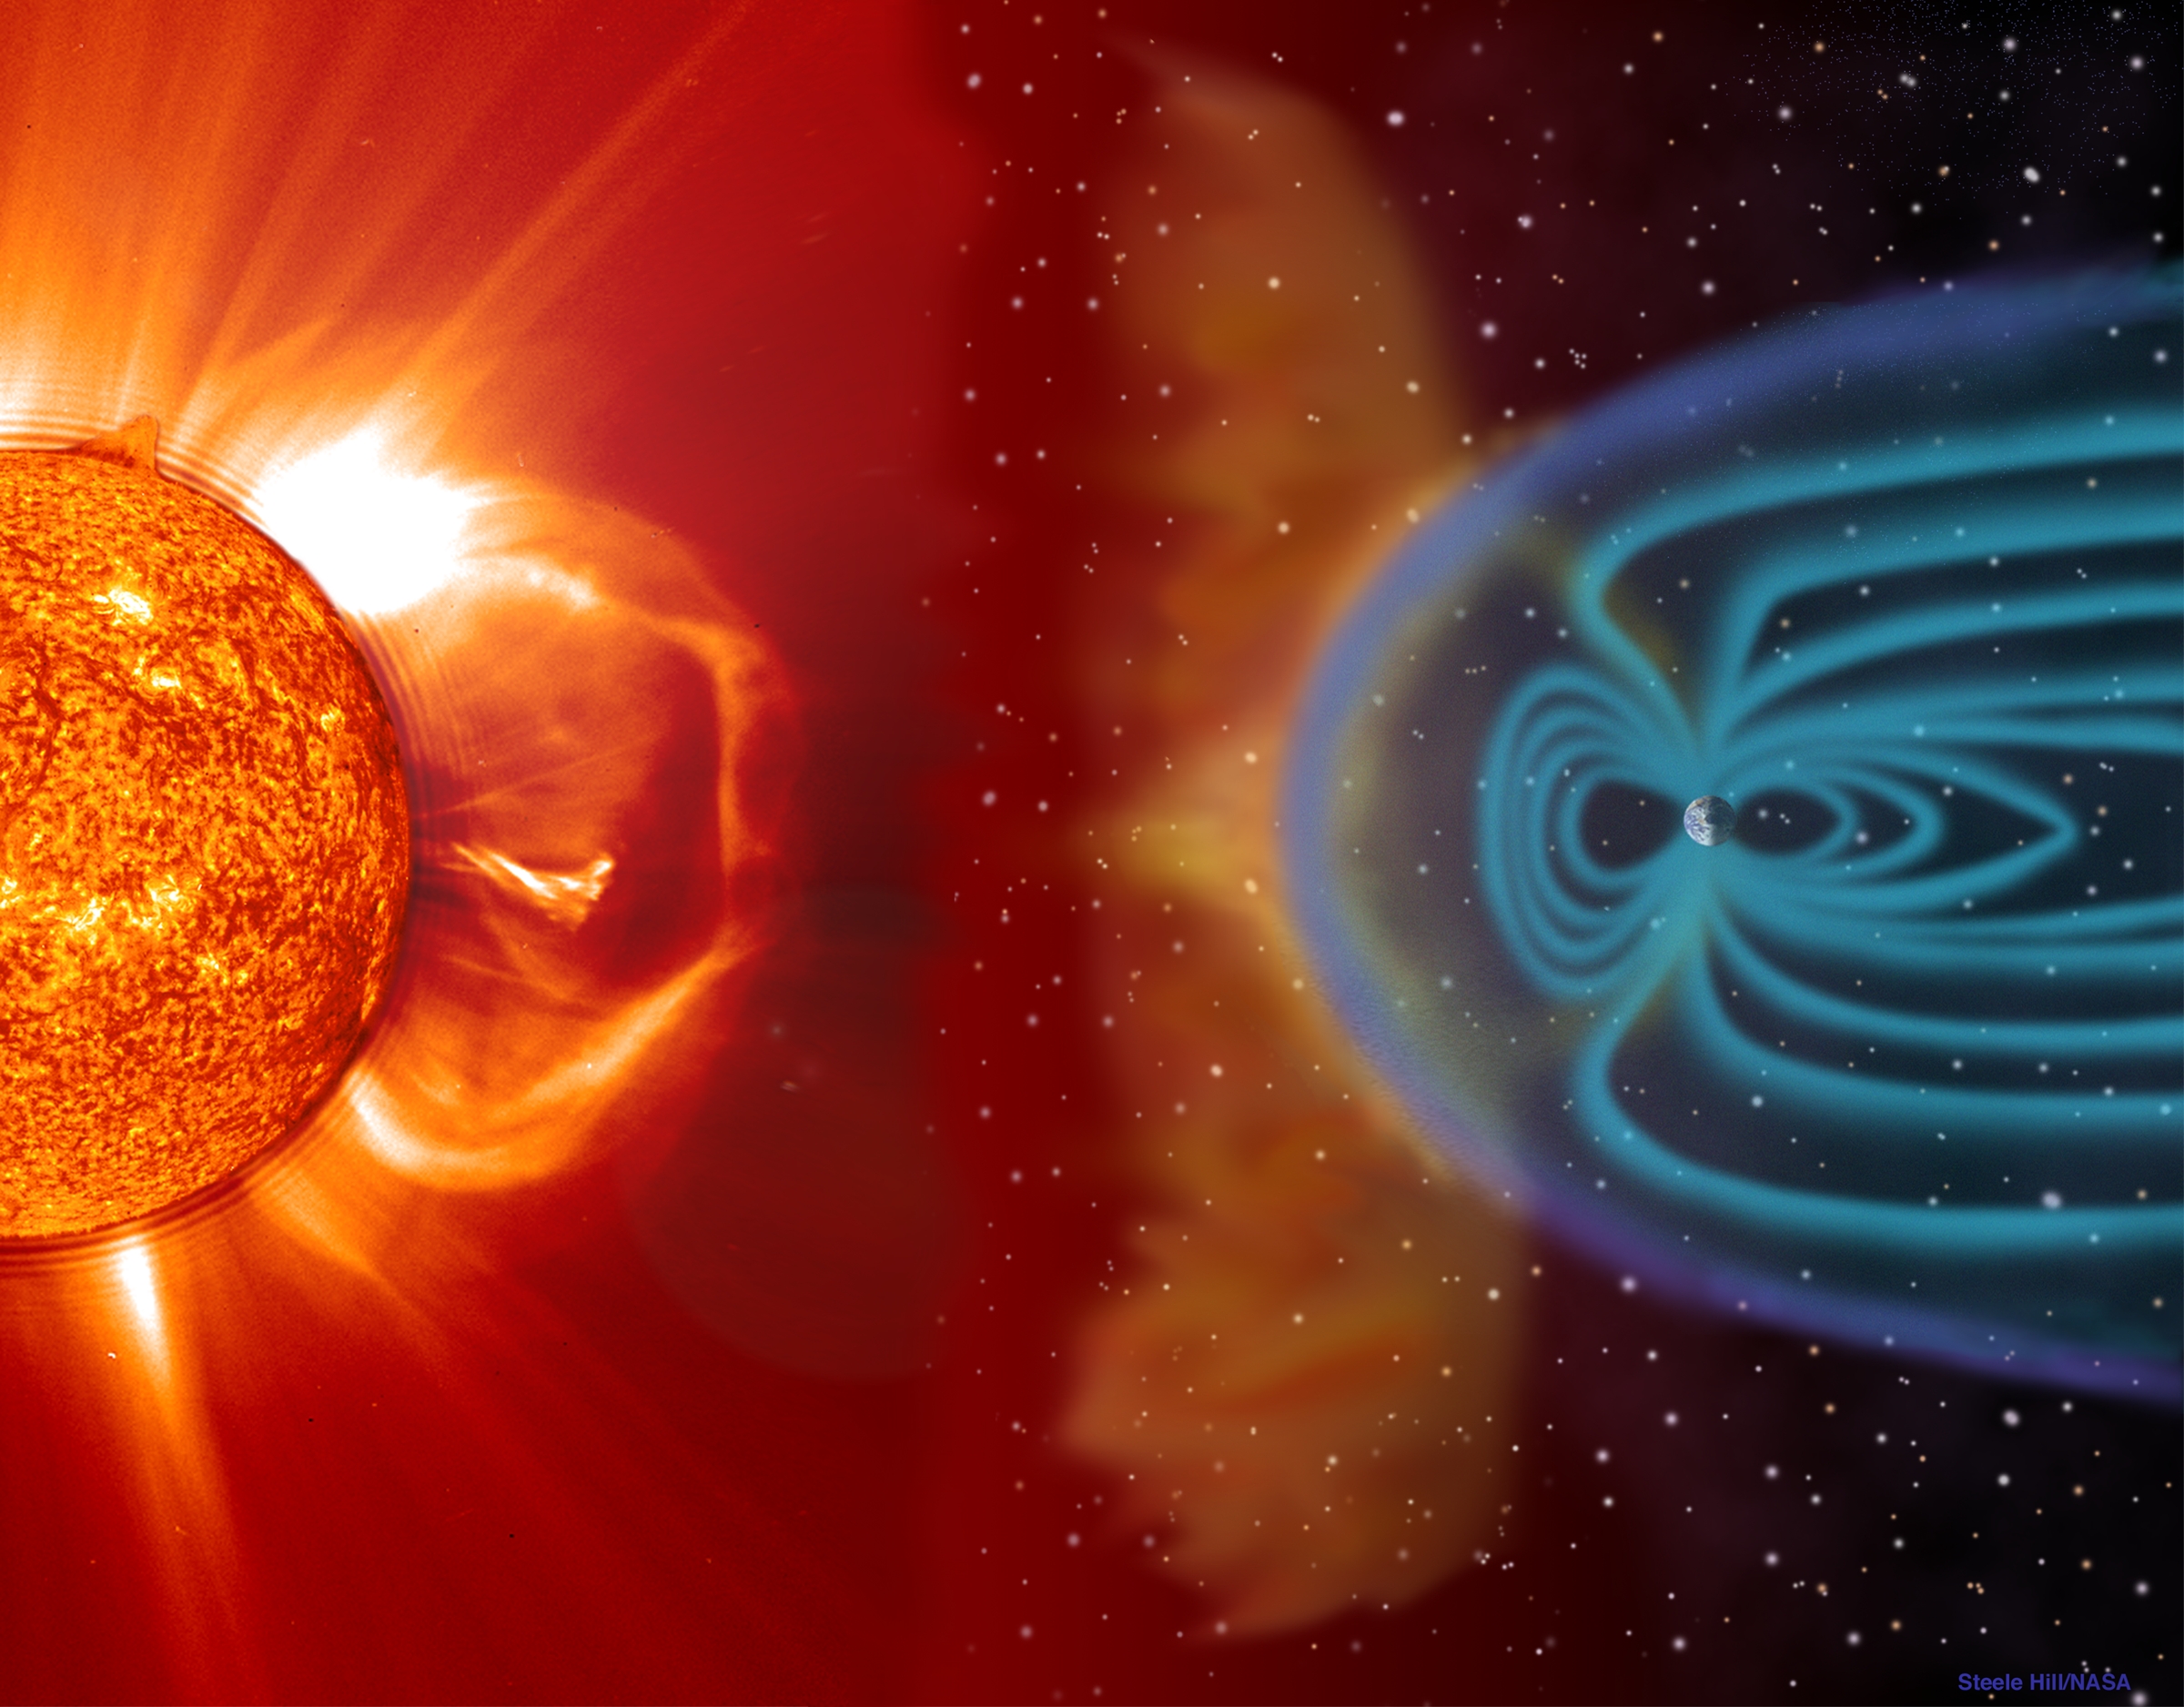 Coronal Mass Ejection at Earth